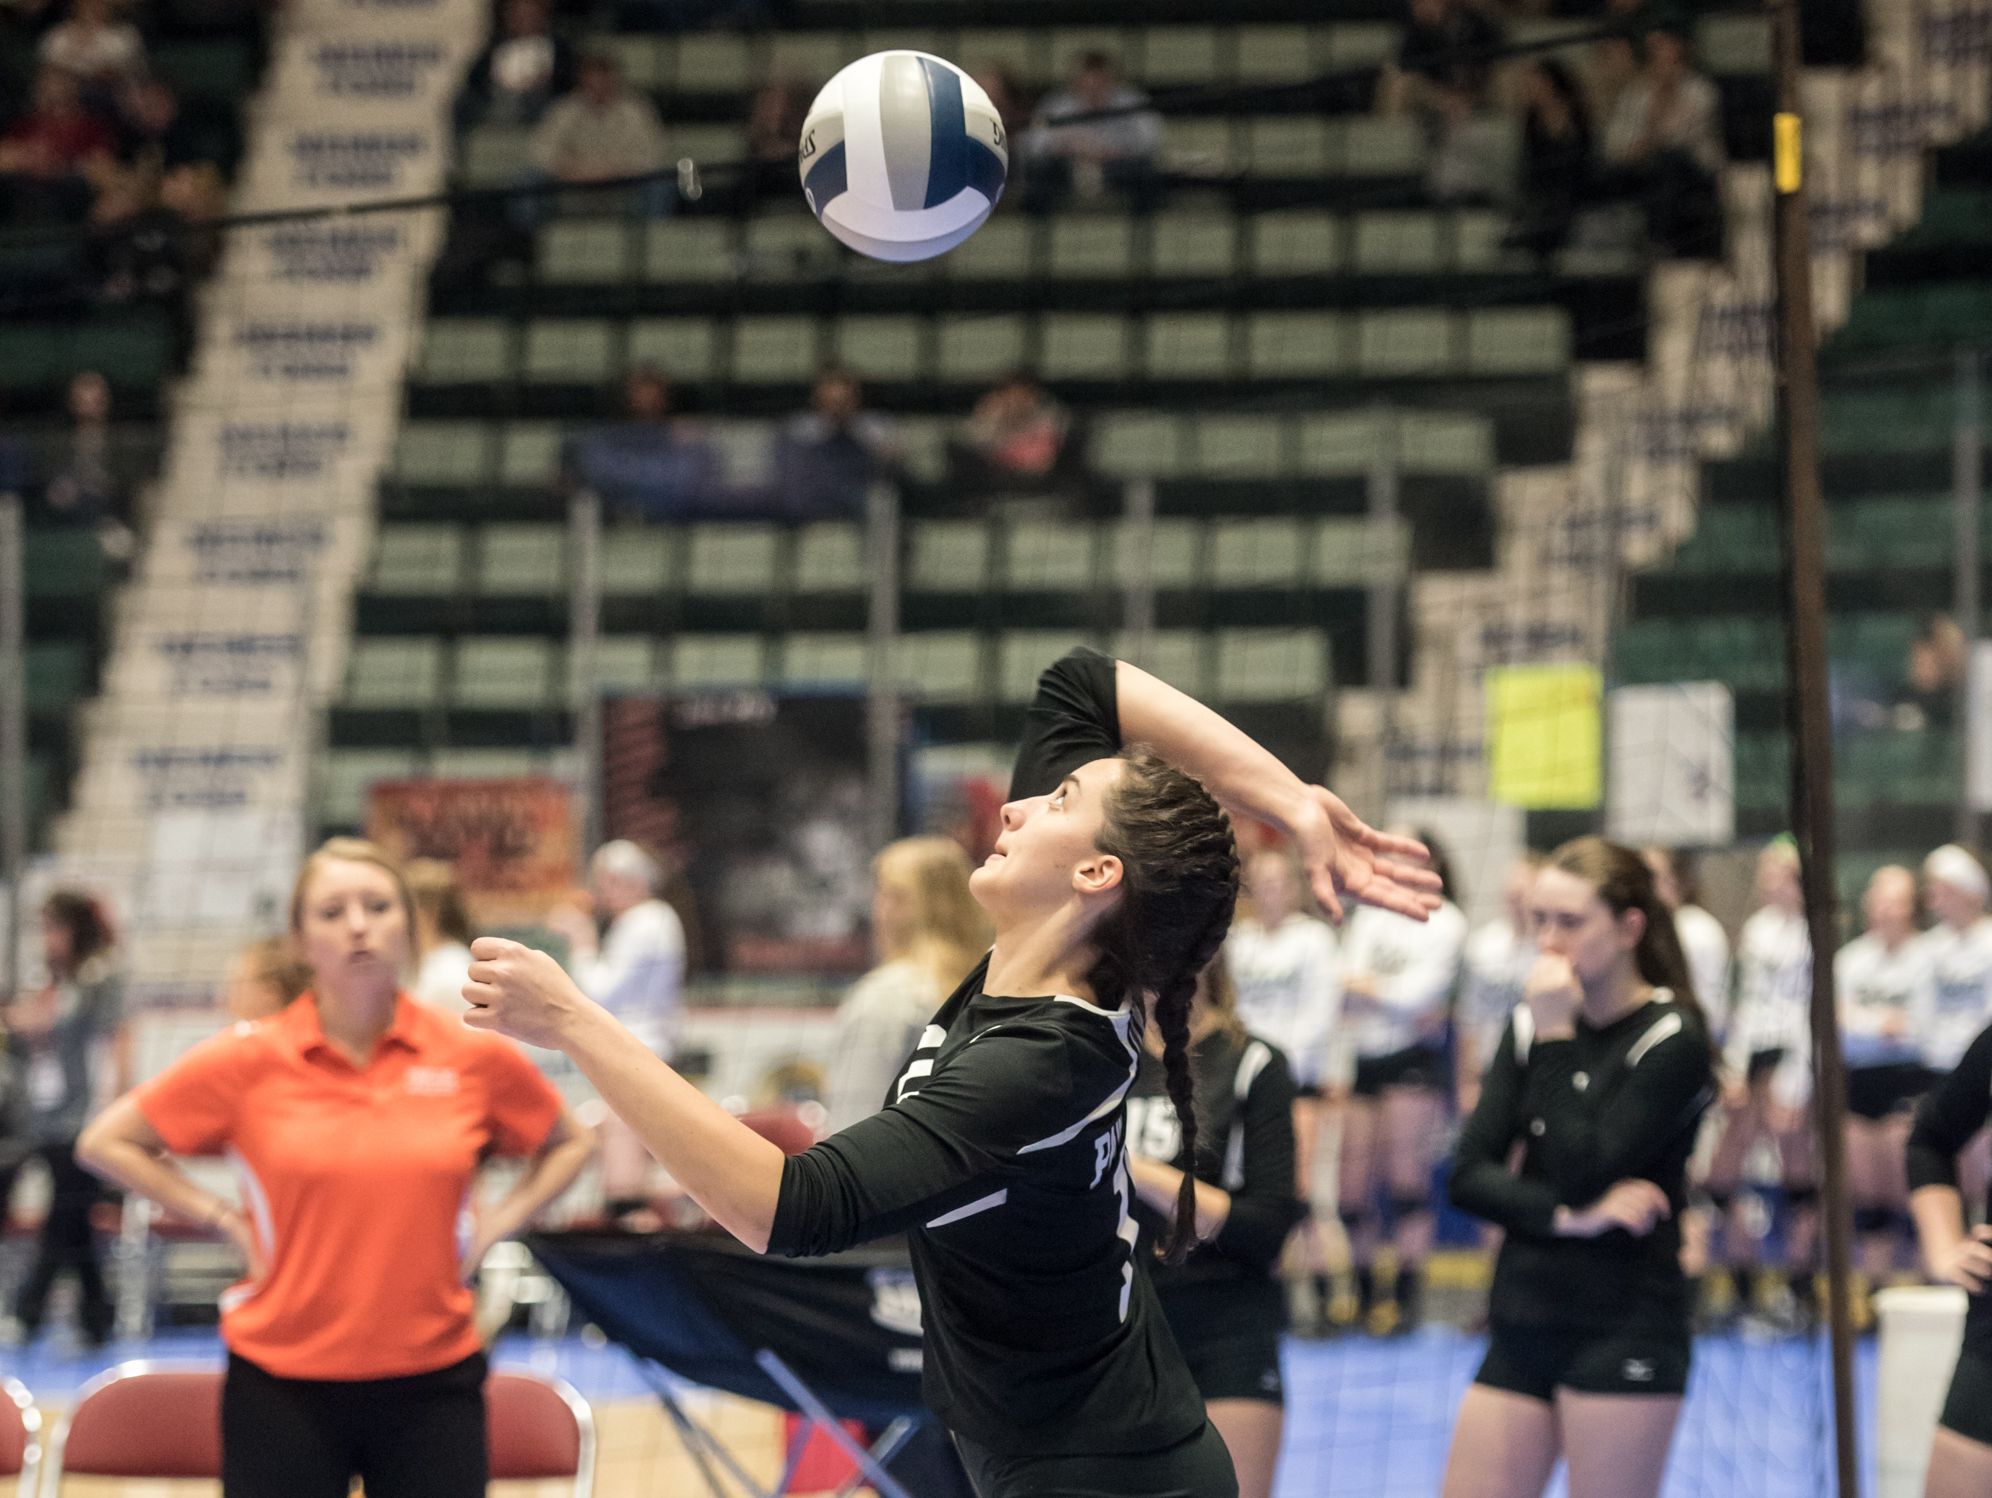 Pawlings' Jaclyn Smith serves the ball during the game against Eden during the Girls Volleyball State Championships at the Glens Falls Civic Center Saturday, November 19th, 2016.